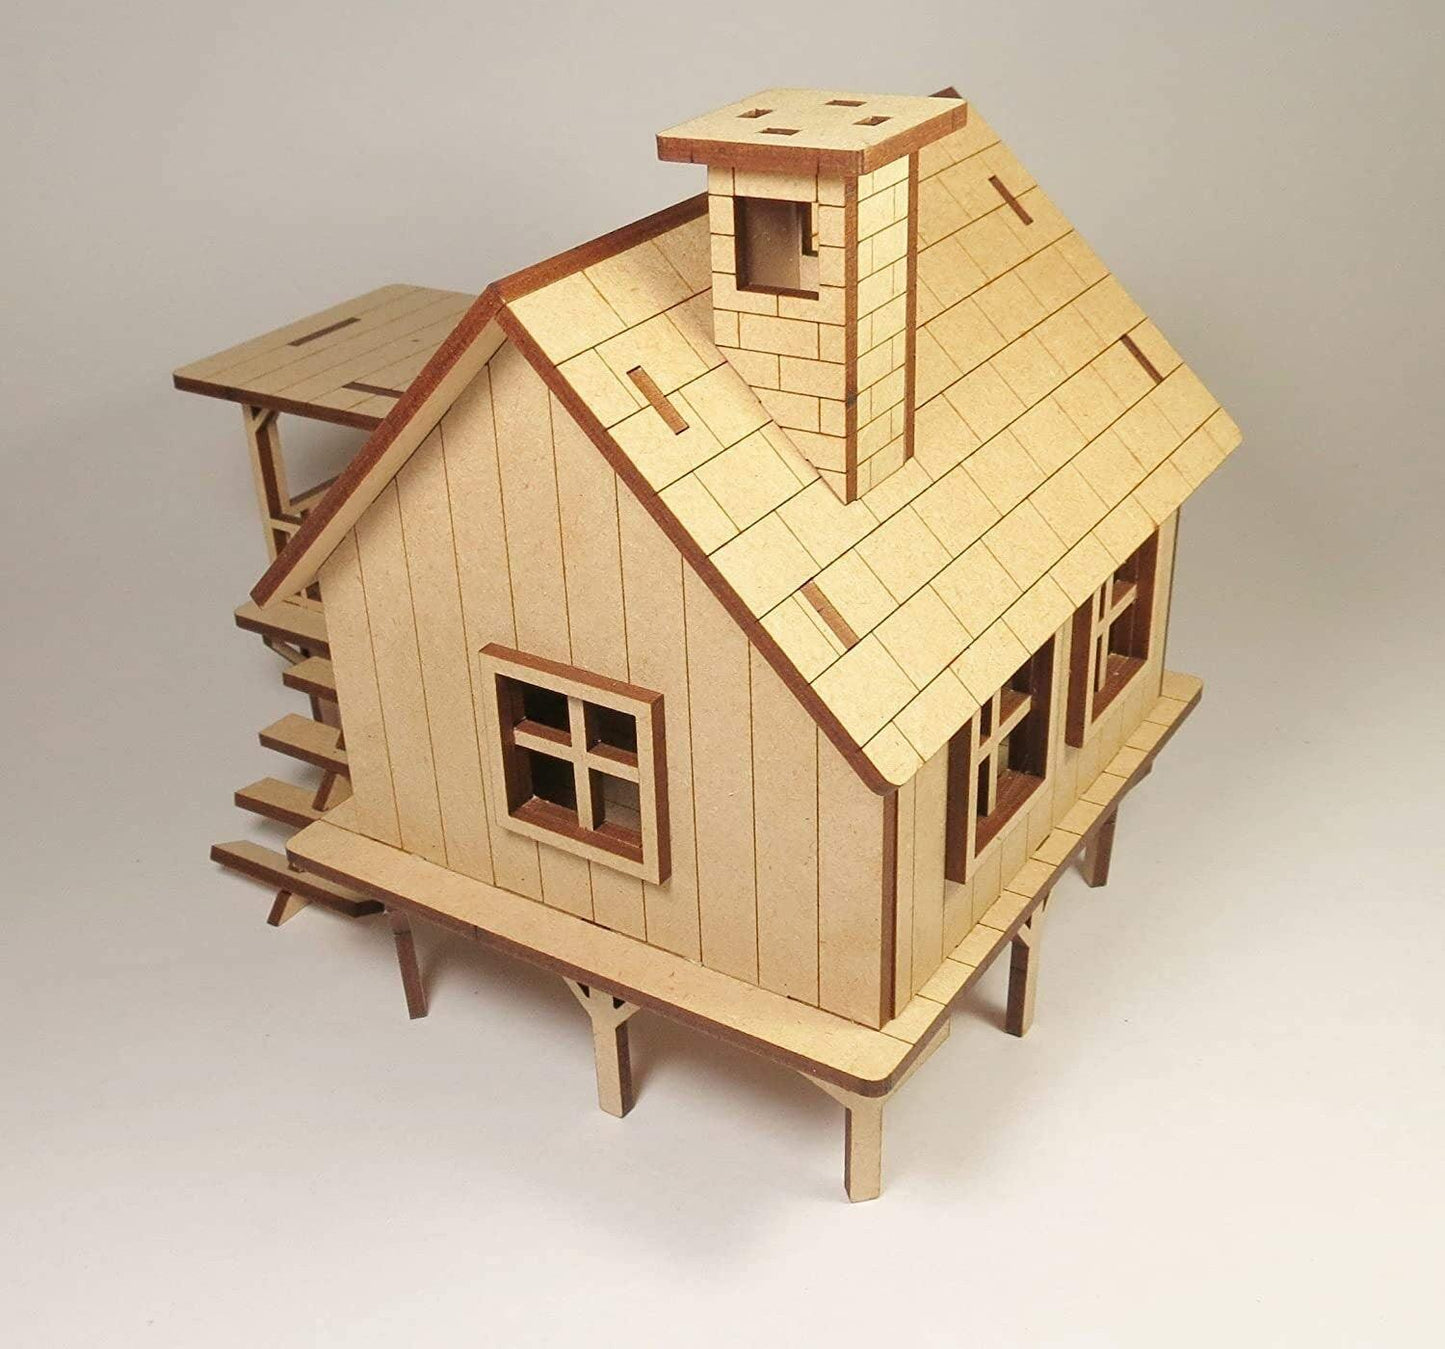 DIY Wooden Doll House Kit - DIY Beach House Miniature - Farm House - 3D Wooden Puzzle - Construction Toy, Modeling Kit - Easy to Assemble - Rajbharti Crafts